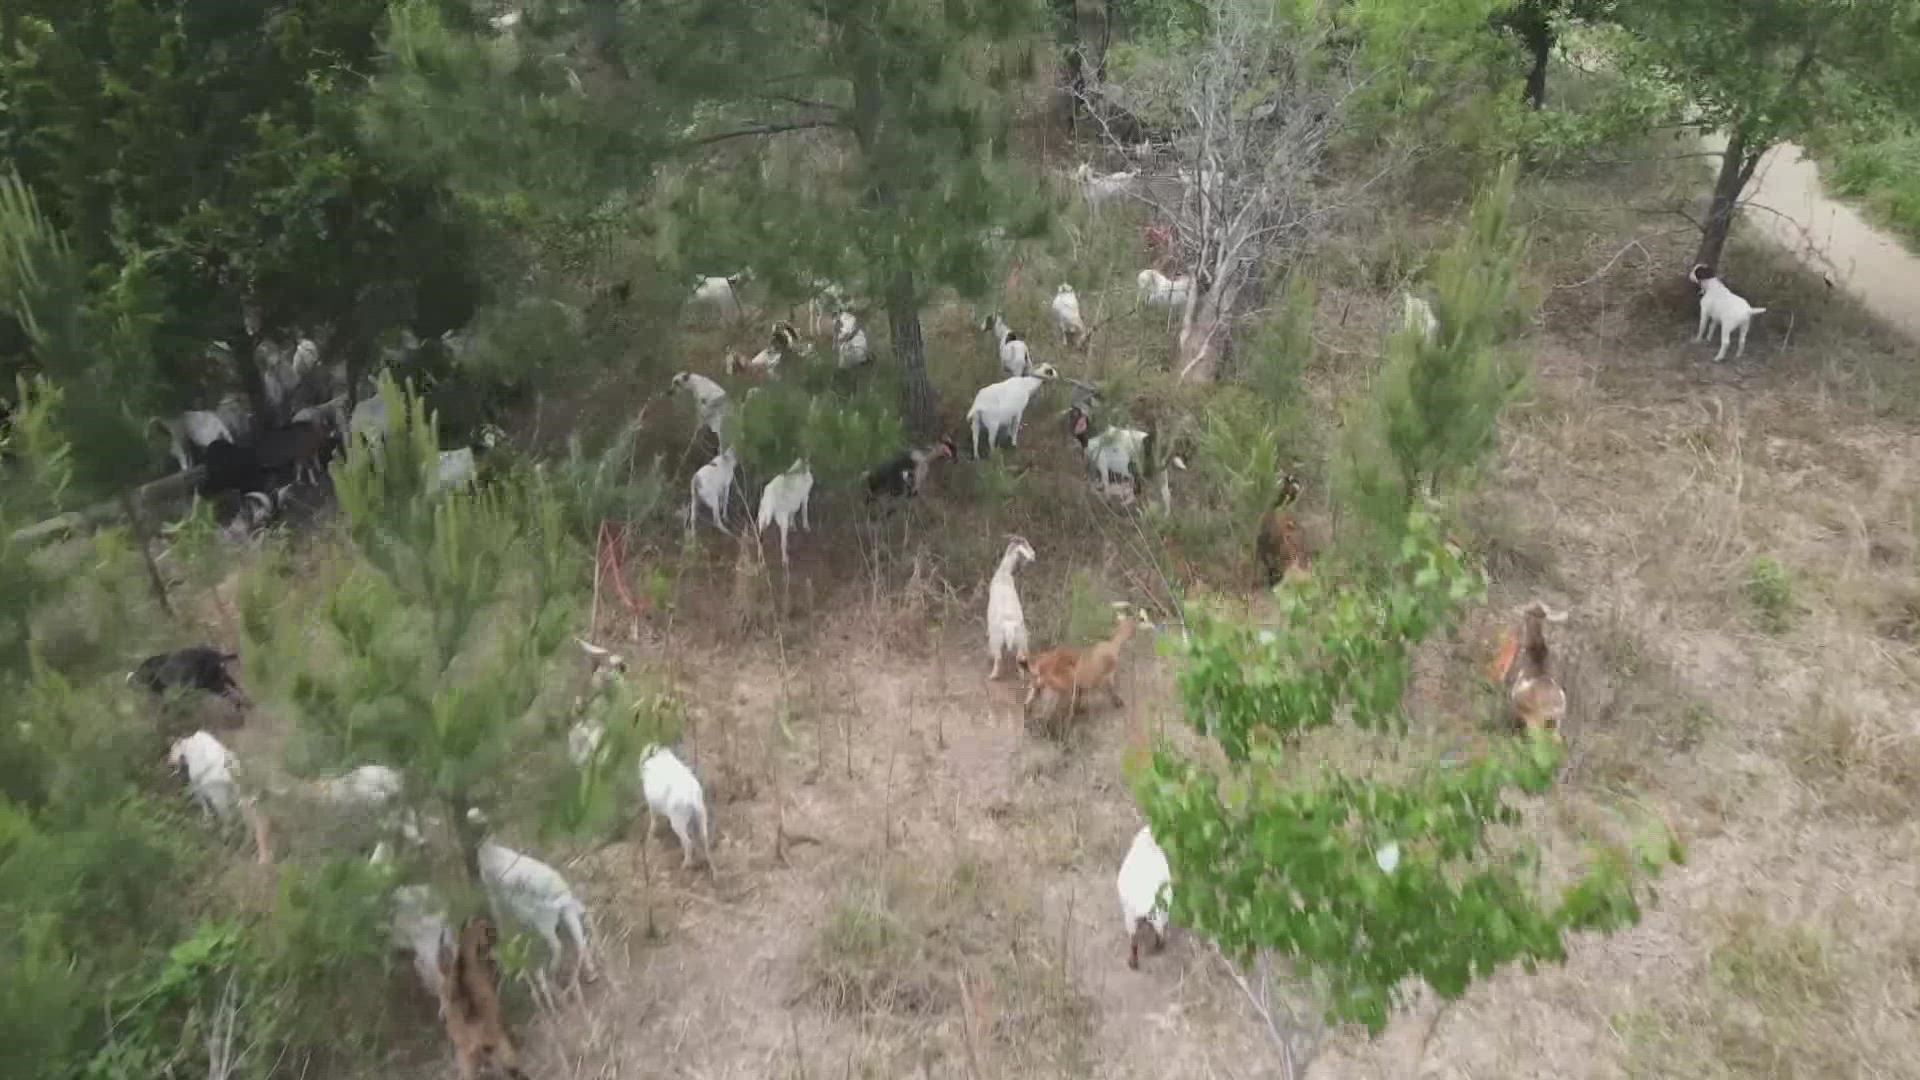 Over the next couple of days, more than 100 goats will be feasting on 2.3 acres around the Arboretum, weeding out invasive species and shrubs.